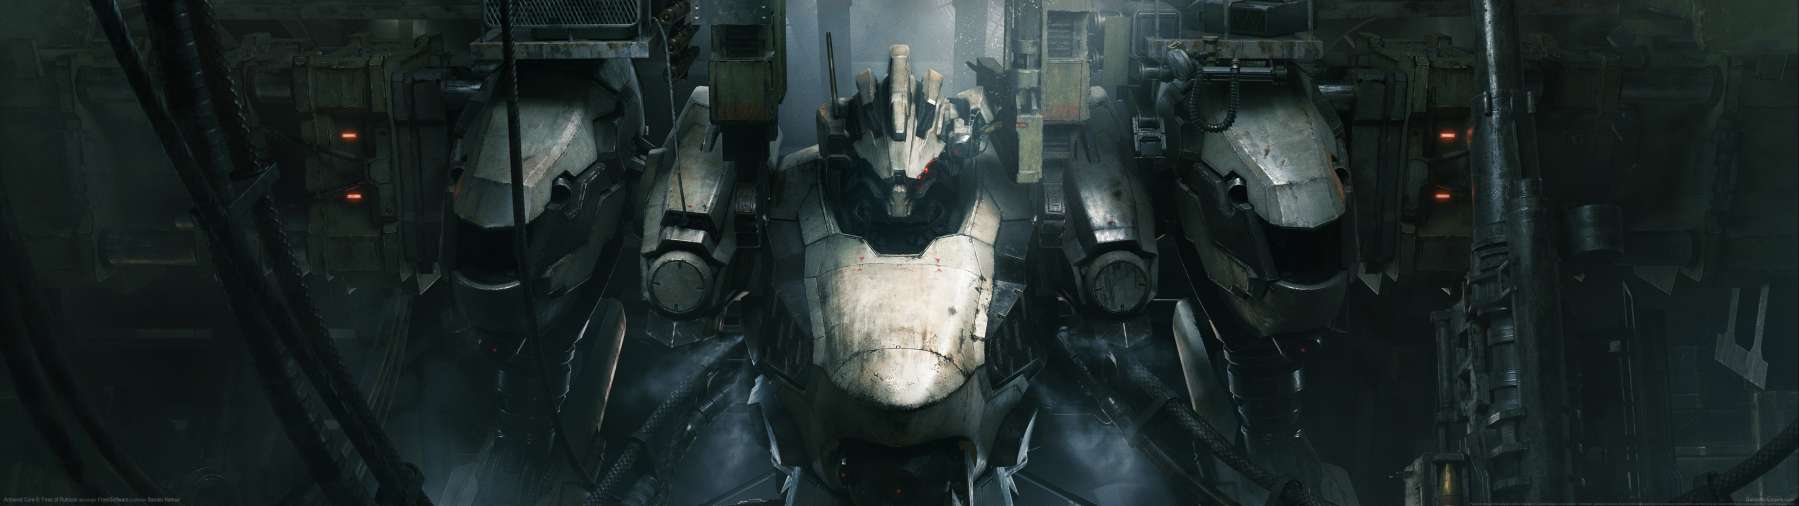 Armored Core 6: Fires of Rubicon superwide fond d'cran 04